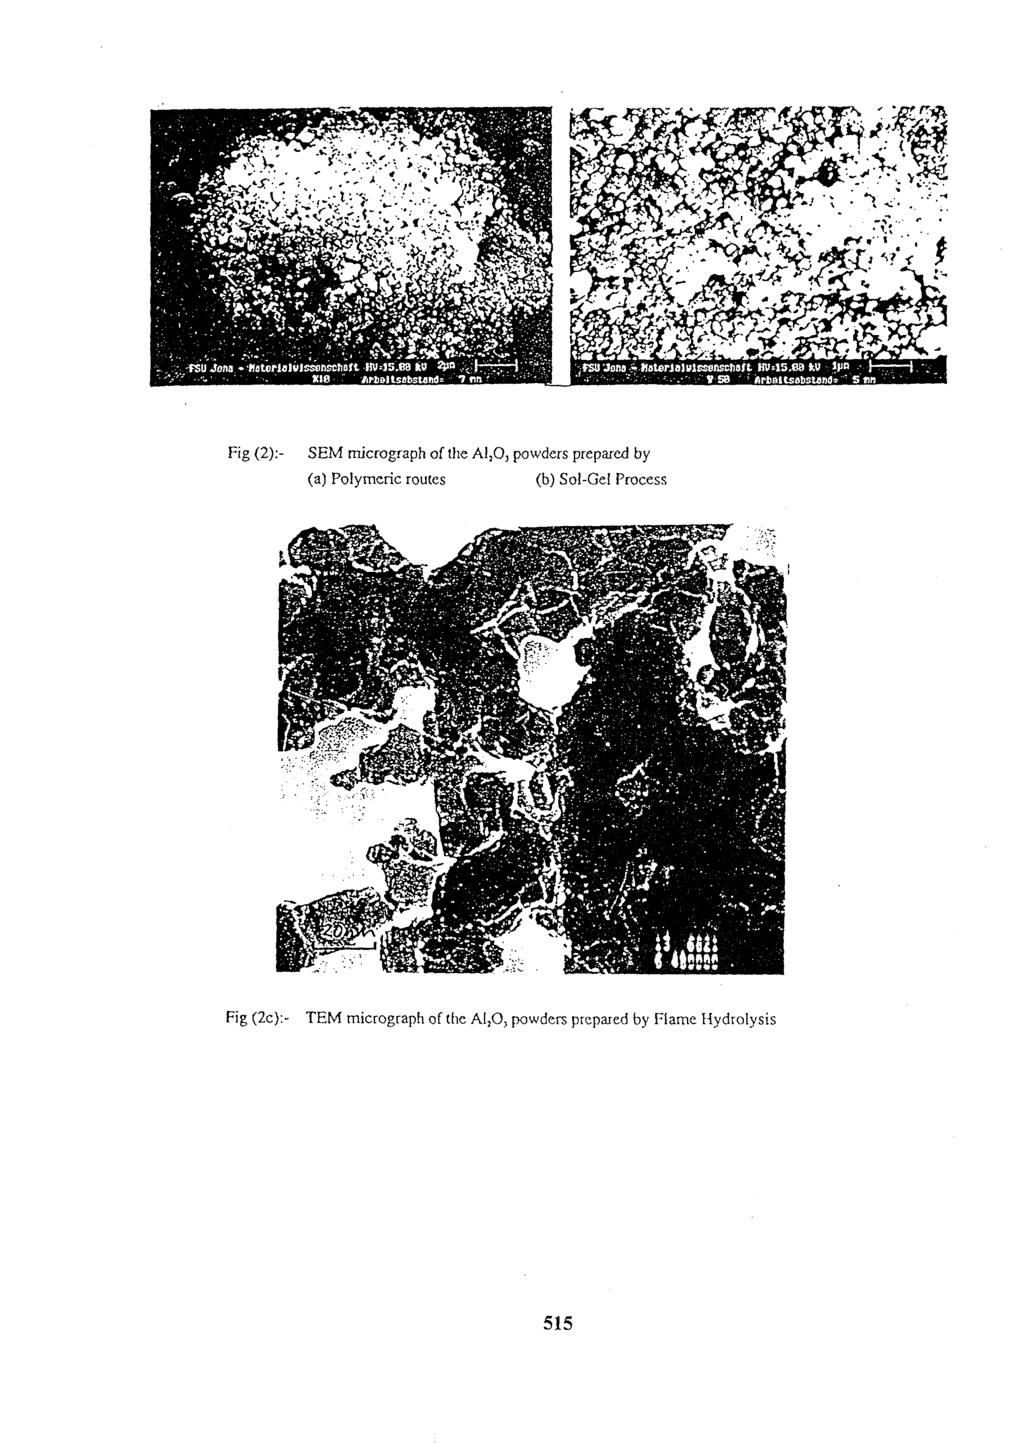 Fig (2):- SEM micrograph of the AI,O, powders prepared by (a) Polymeric routes (b) So!-Ge!